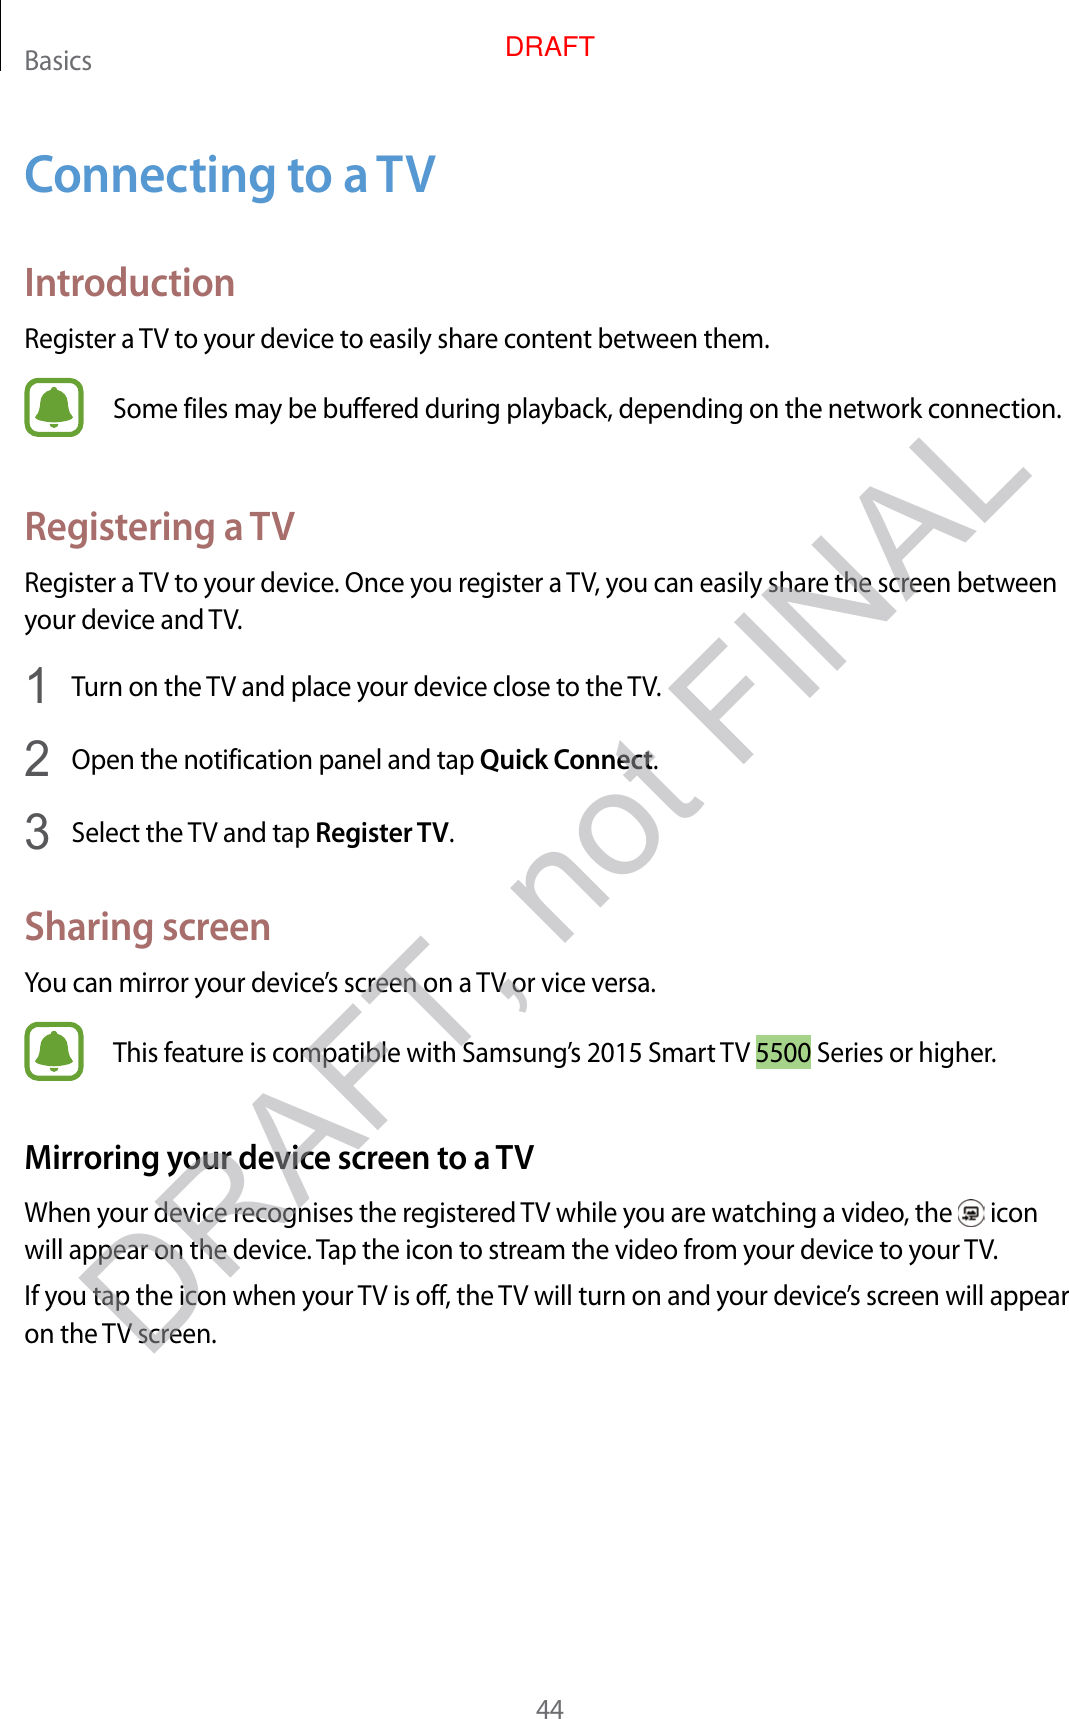 Basics44Connecting to a TVIntroductionRegister a TV to your device to easily share content between them.Some files may be buffered during playback, depending on the network connection.Registering a TVRegister a TV to your device. Once you register a TV, you can easily share the screen between your device and TV.1  Turn on the TV and place your device close to the TV.2  Open the notification panel and tap Quick Connect.3  Select the TV and tap Register TV.Sharing screenYou can mirror your device’s screen on a TV or vice versa.This feature is compatible with Samsung’s 2015 Smart TV 5500 Series or higher.Mirroring your device screen to a TVWhen your device recognises the registered TV while you are watching a video, the   icon will appear on the device. Tap the icon to stream the video from your device to your TV.If you tap the icon when your TV is off, the TV will turn on and your device’s screen will appear on the TV screen.DRAFT, not FINALDRAFT